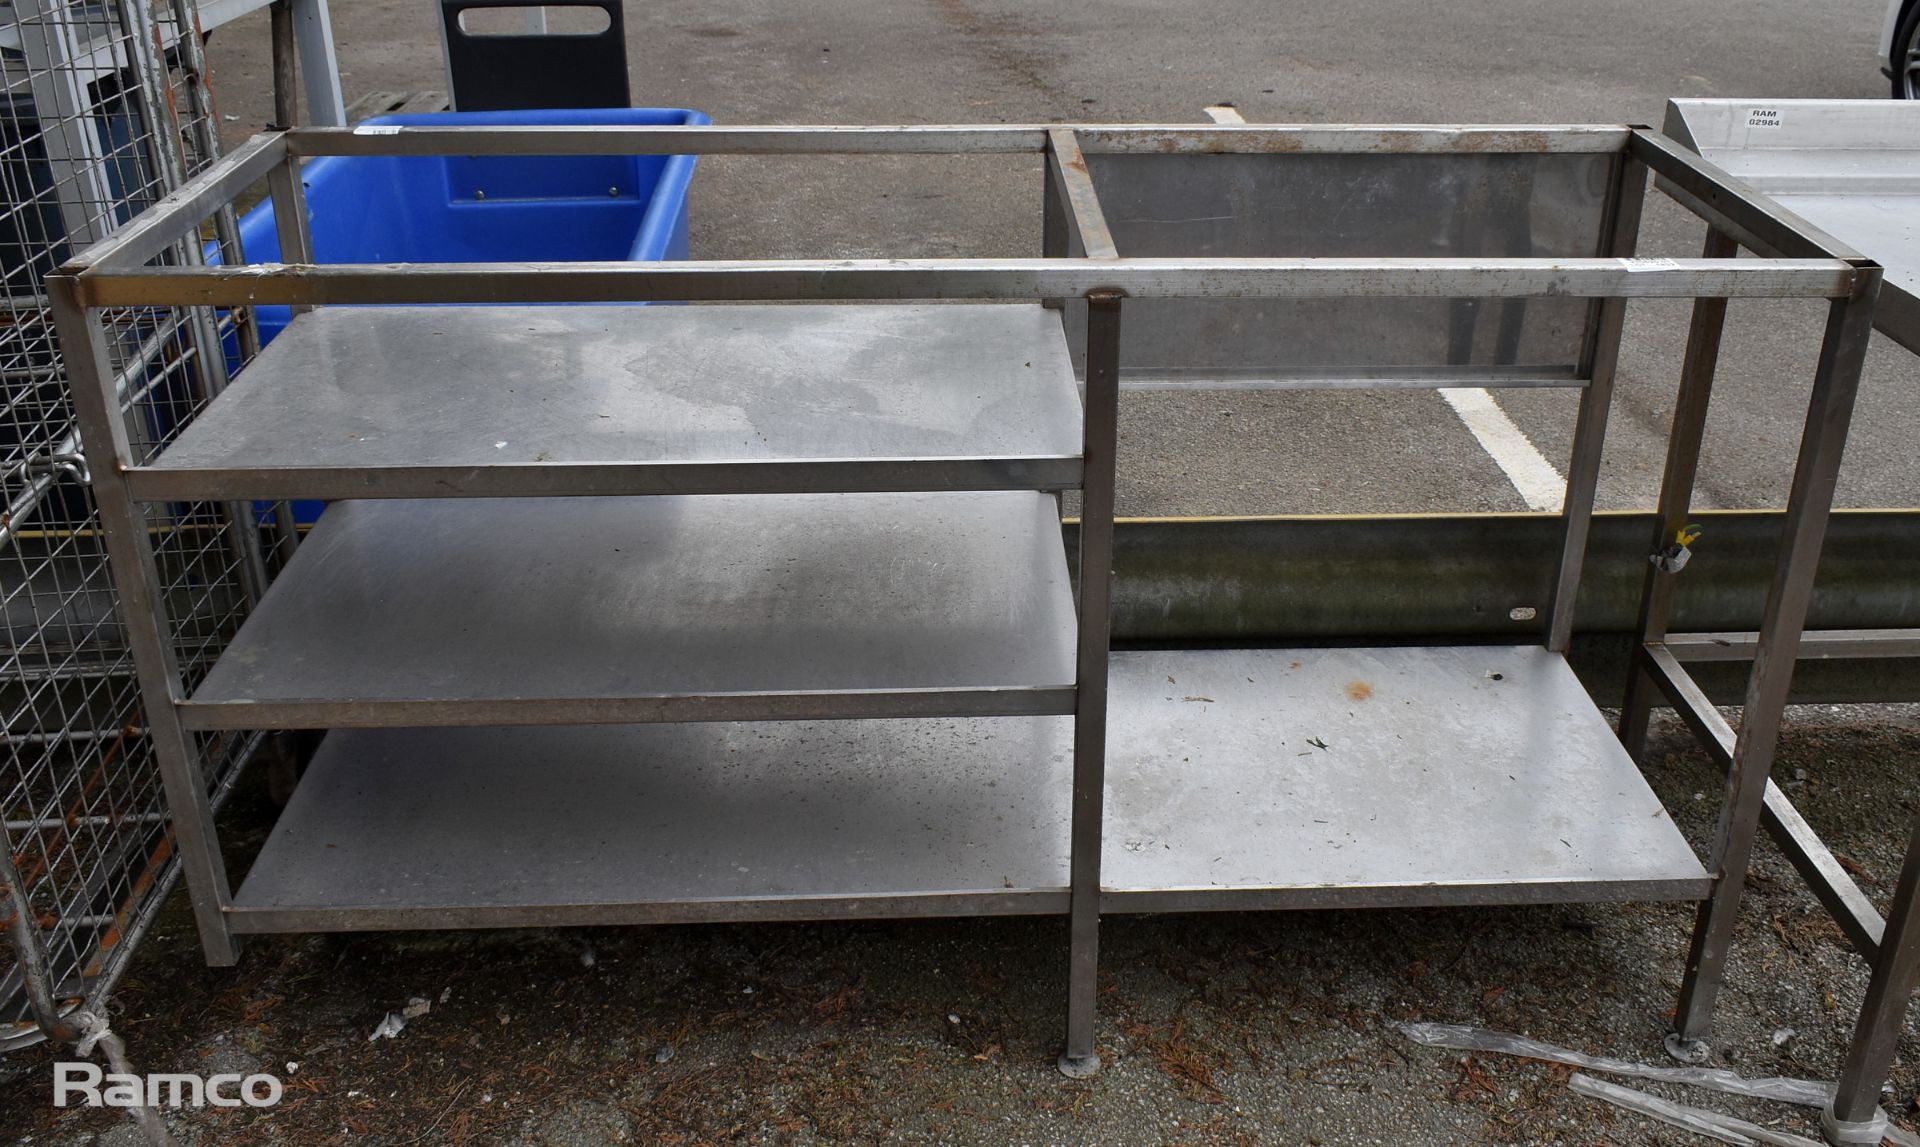 Stainless steel table with 3 tier bottom shelves - missing table top - W 1680 x D 600 x H 910mm